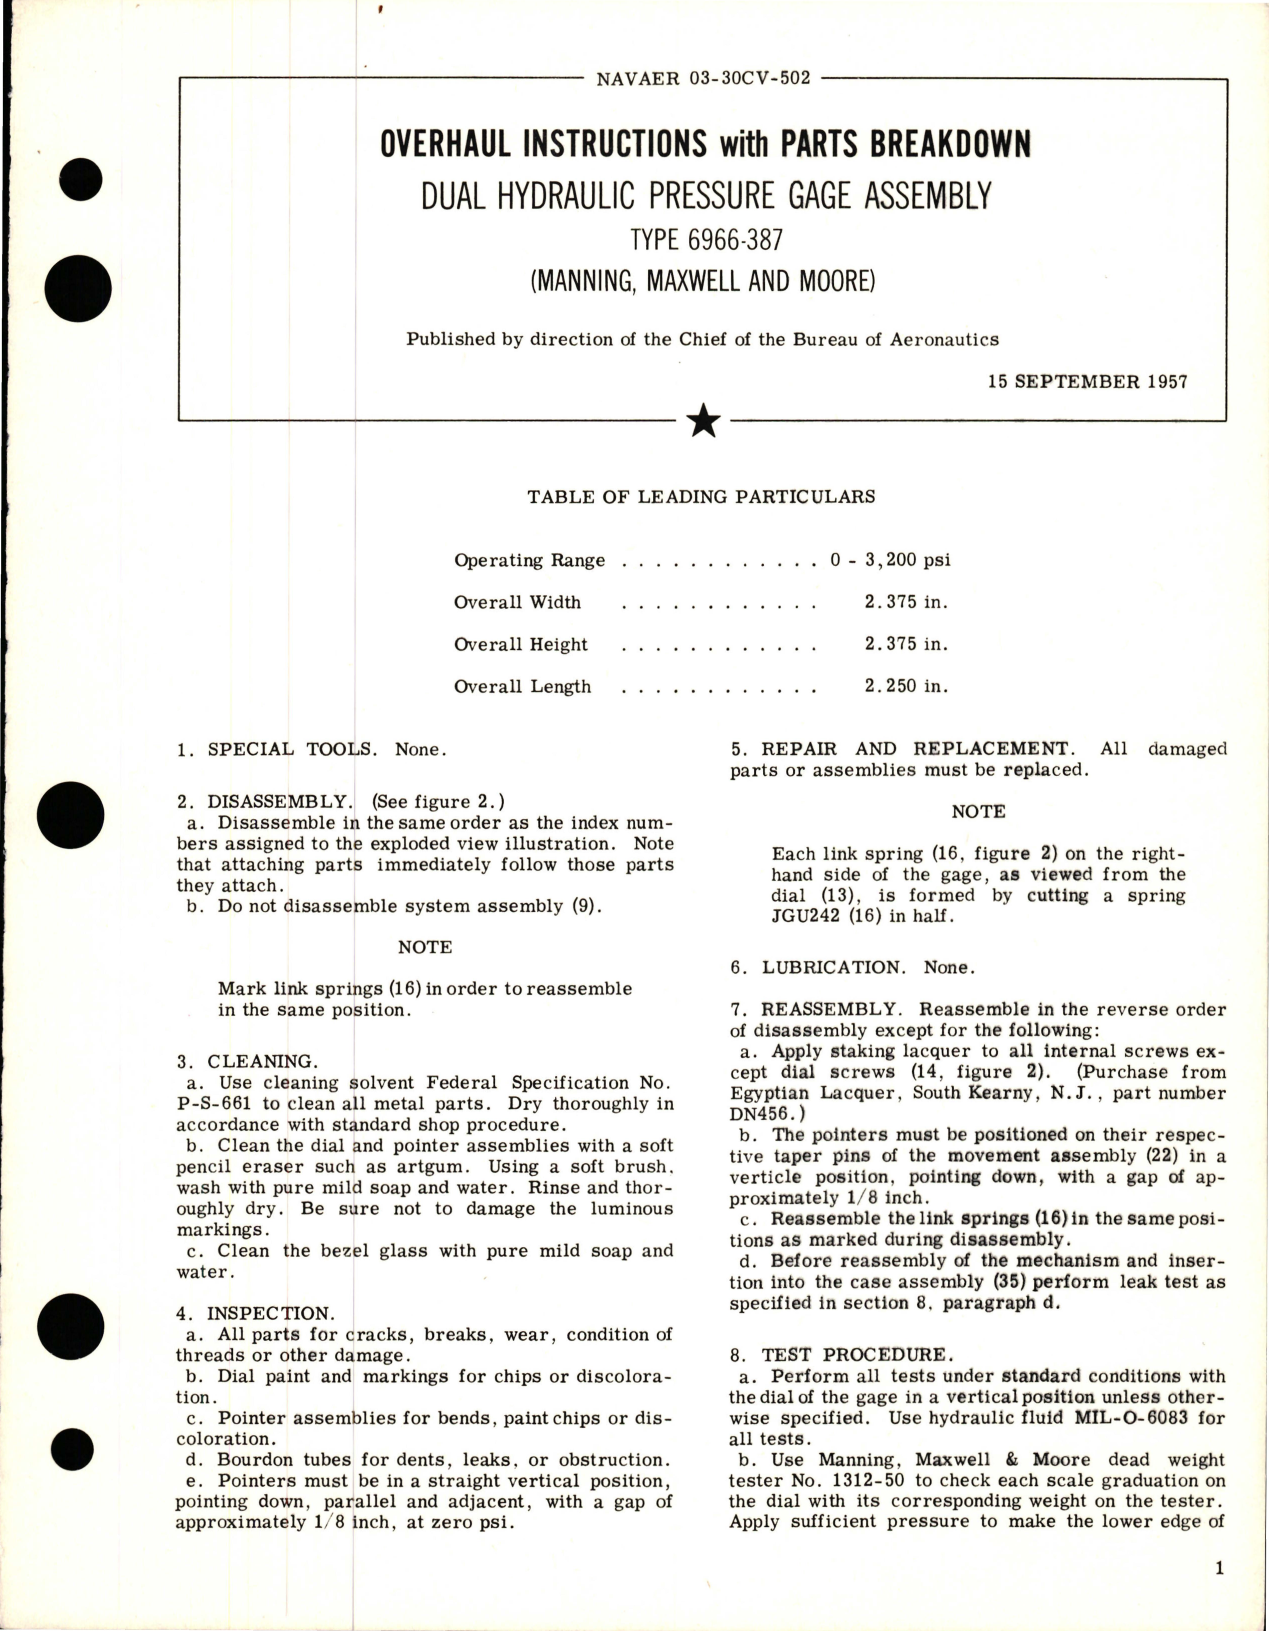 Sample page 1 from AirCorps Library document: Overhaul Instructions with Parts for Dual Hydraulic Pressure Gage Assembly - Type 6966-387